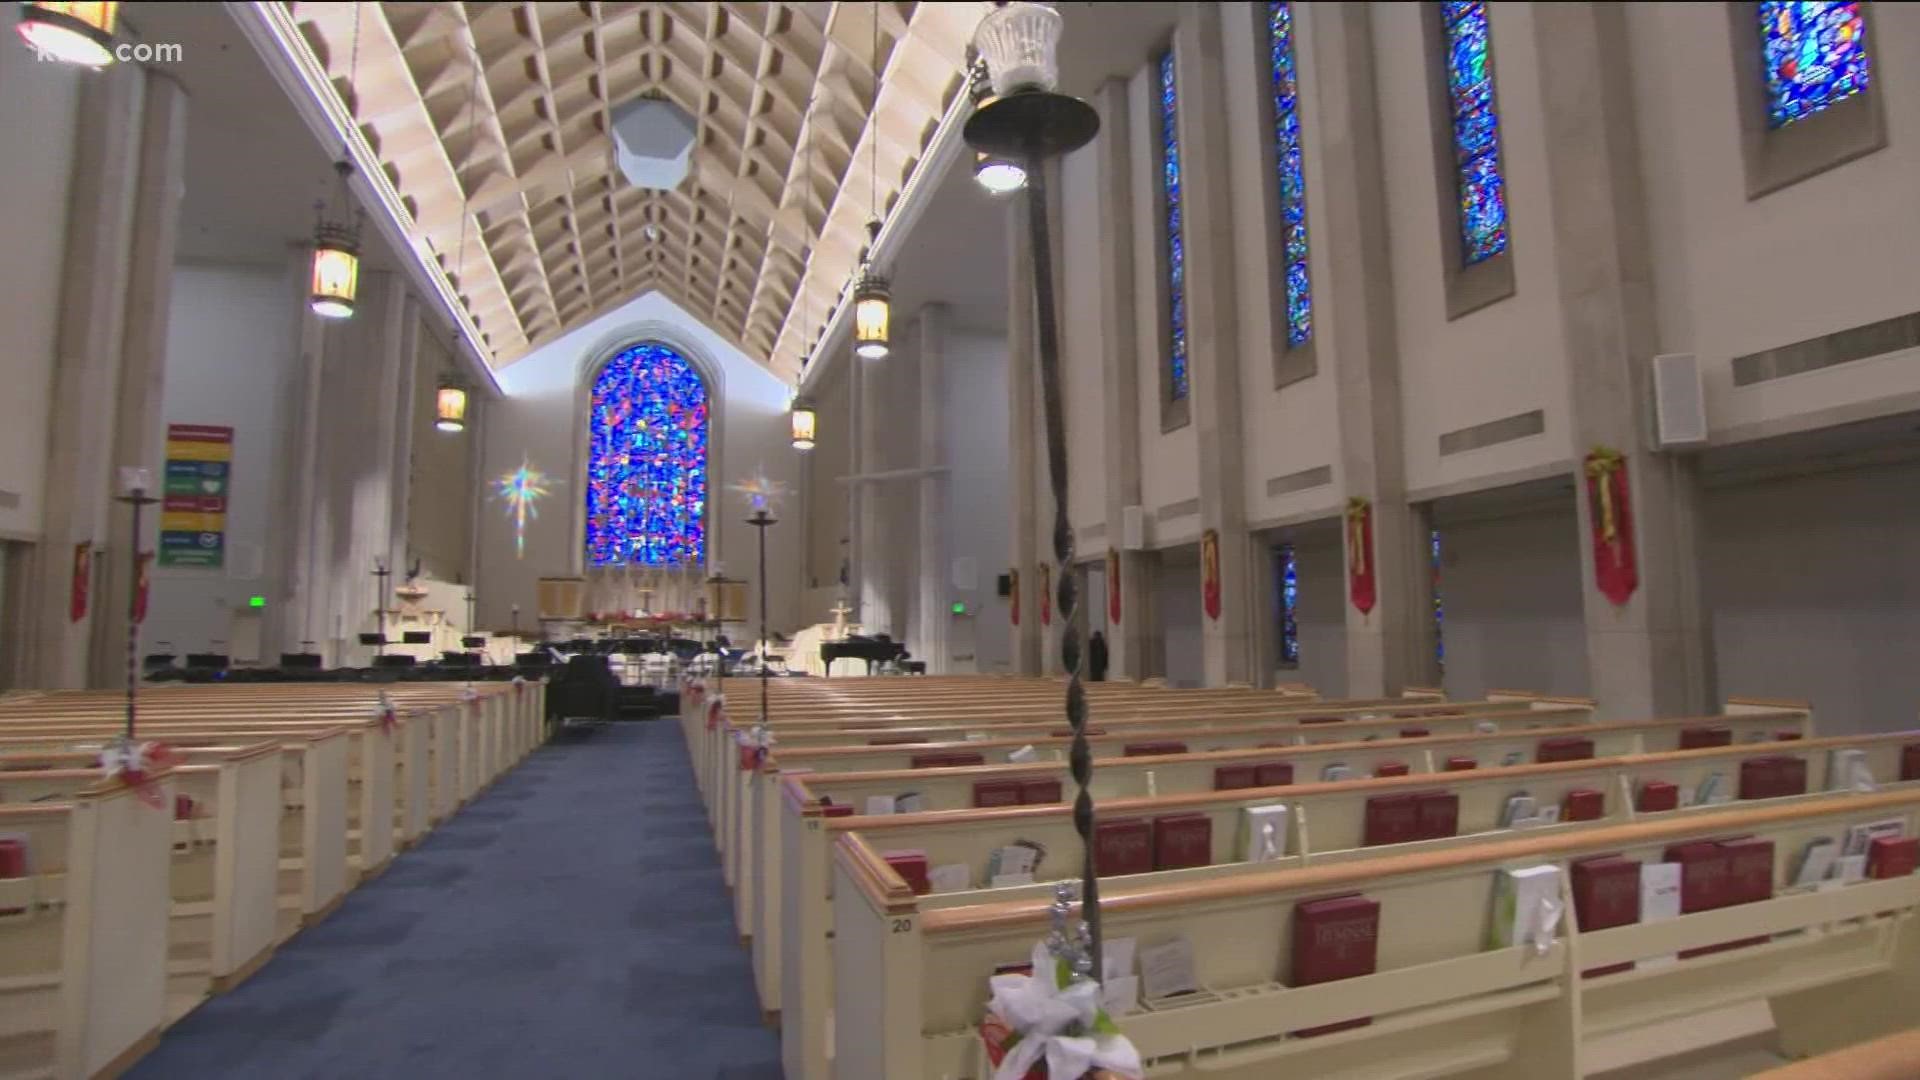 Until today, the Cathedral of the Rockies sat empty for Easter services while celebrating virtually, since 2019.